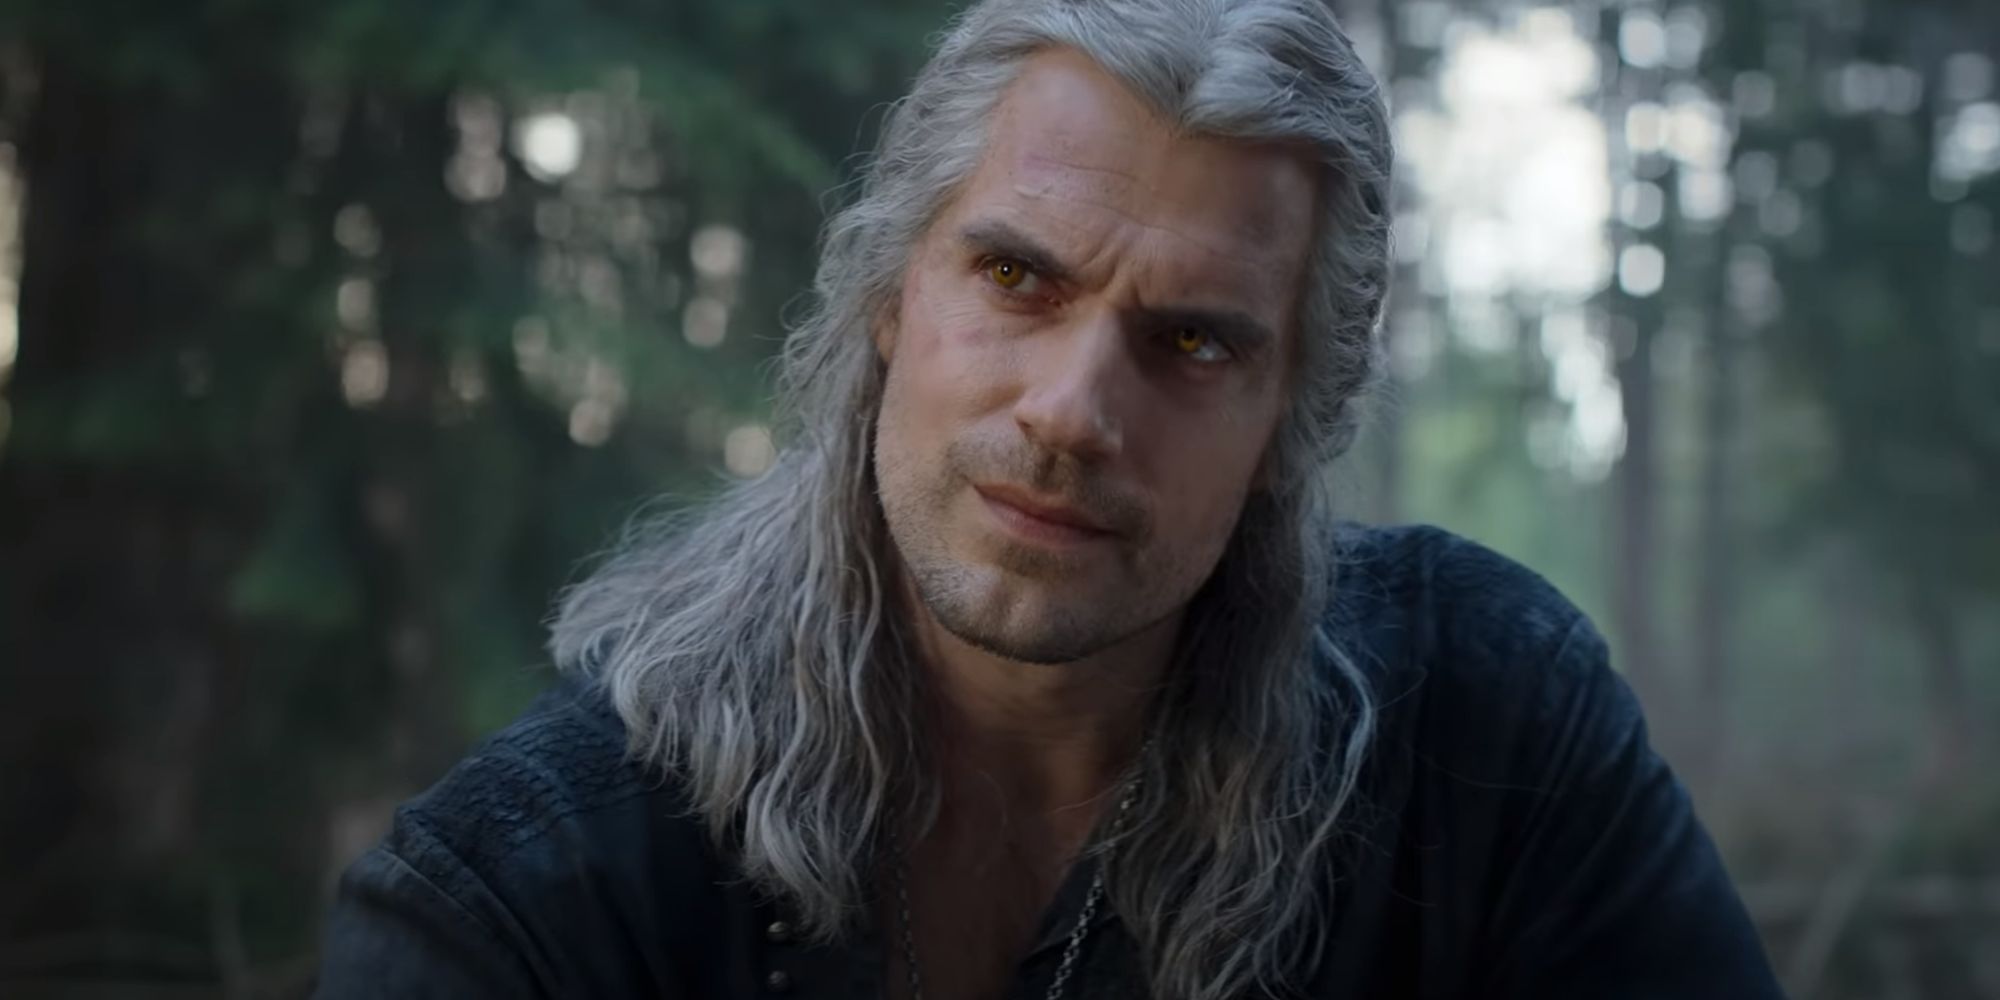 Henry Cavill as Geralt looking intense in The Witcher Season 3